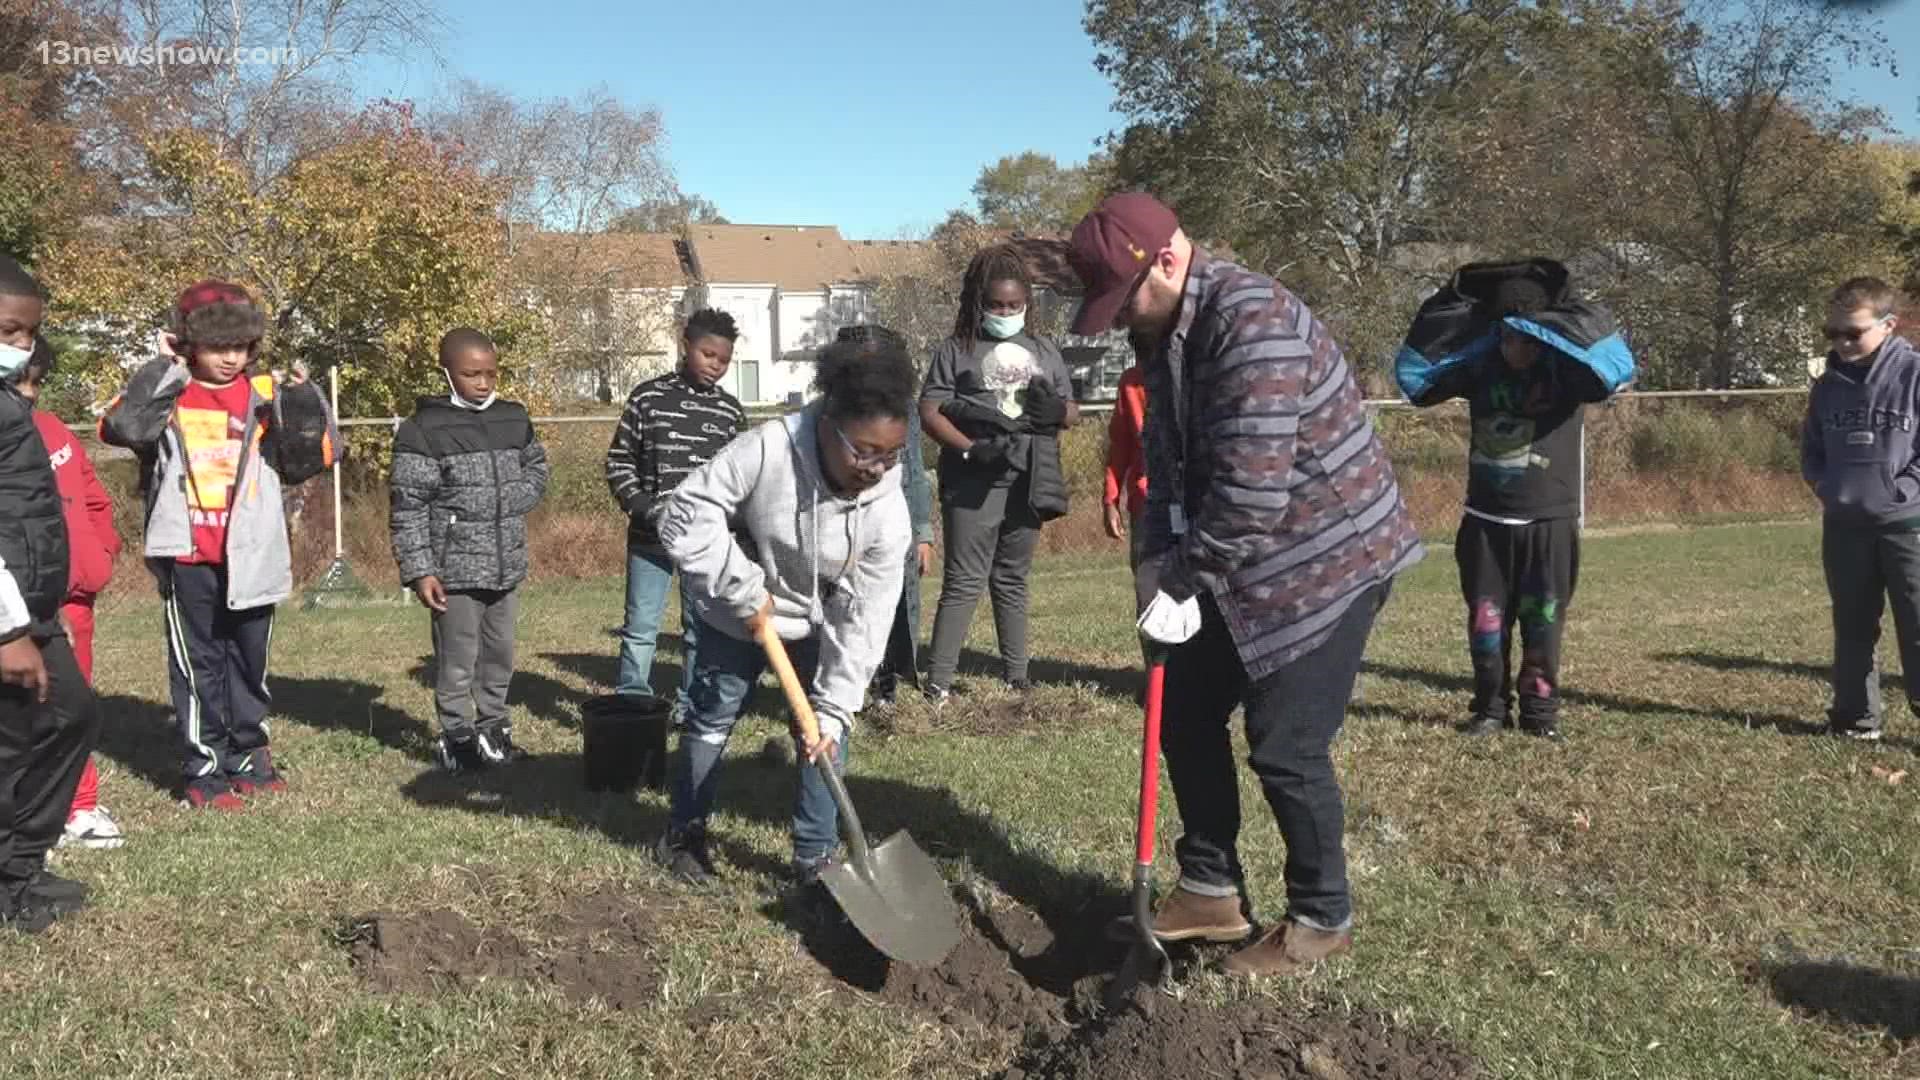 Virginia Beach students planted trees between classes in order to help the environment, and stop flooding in the area.